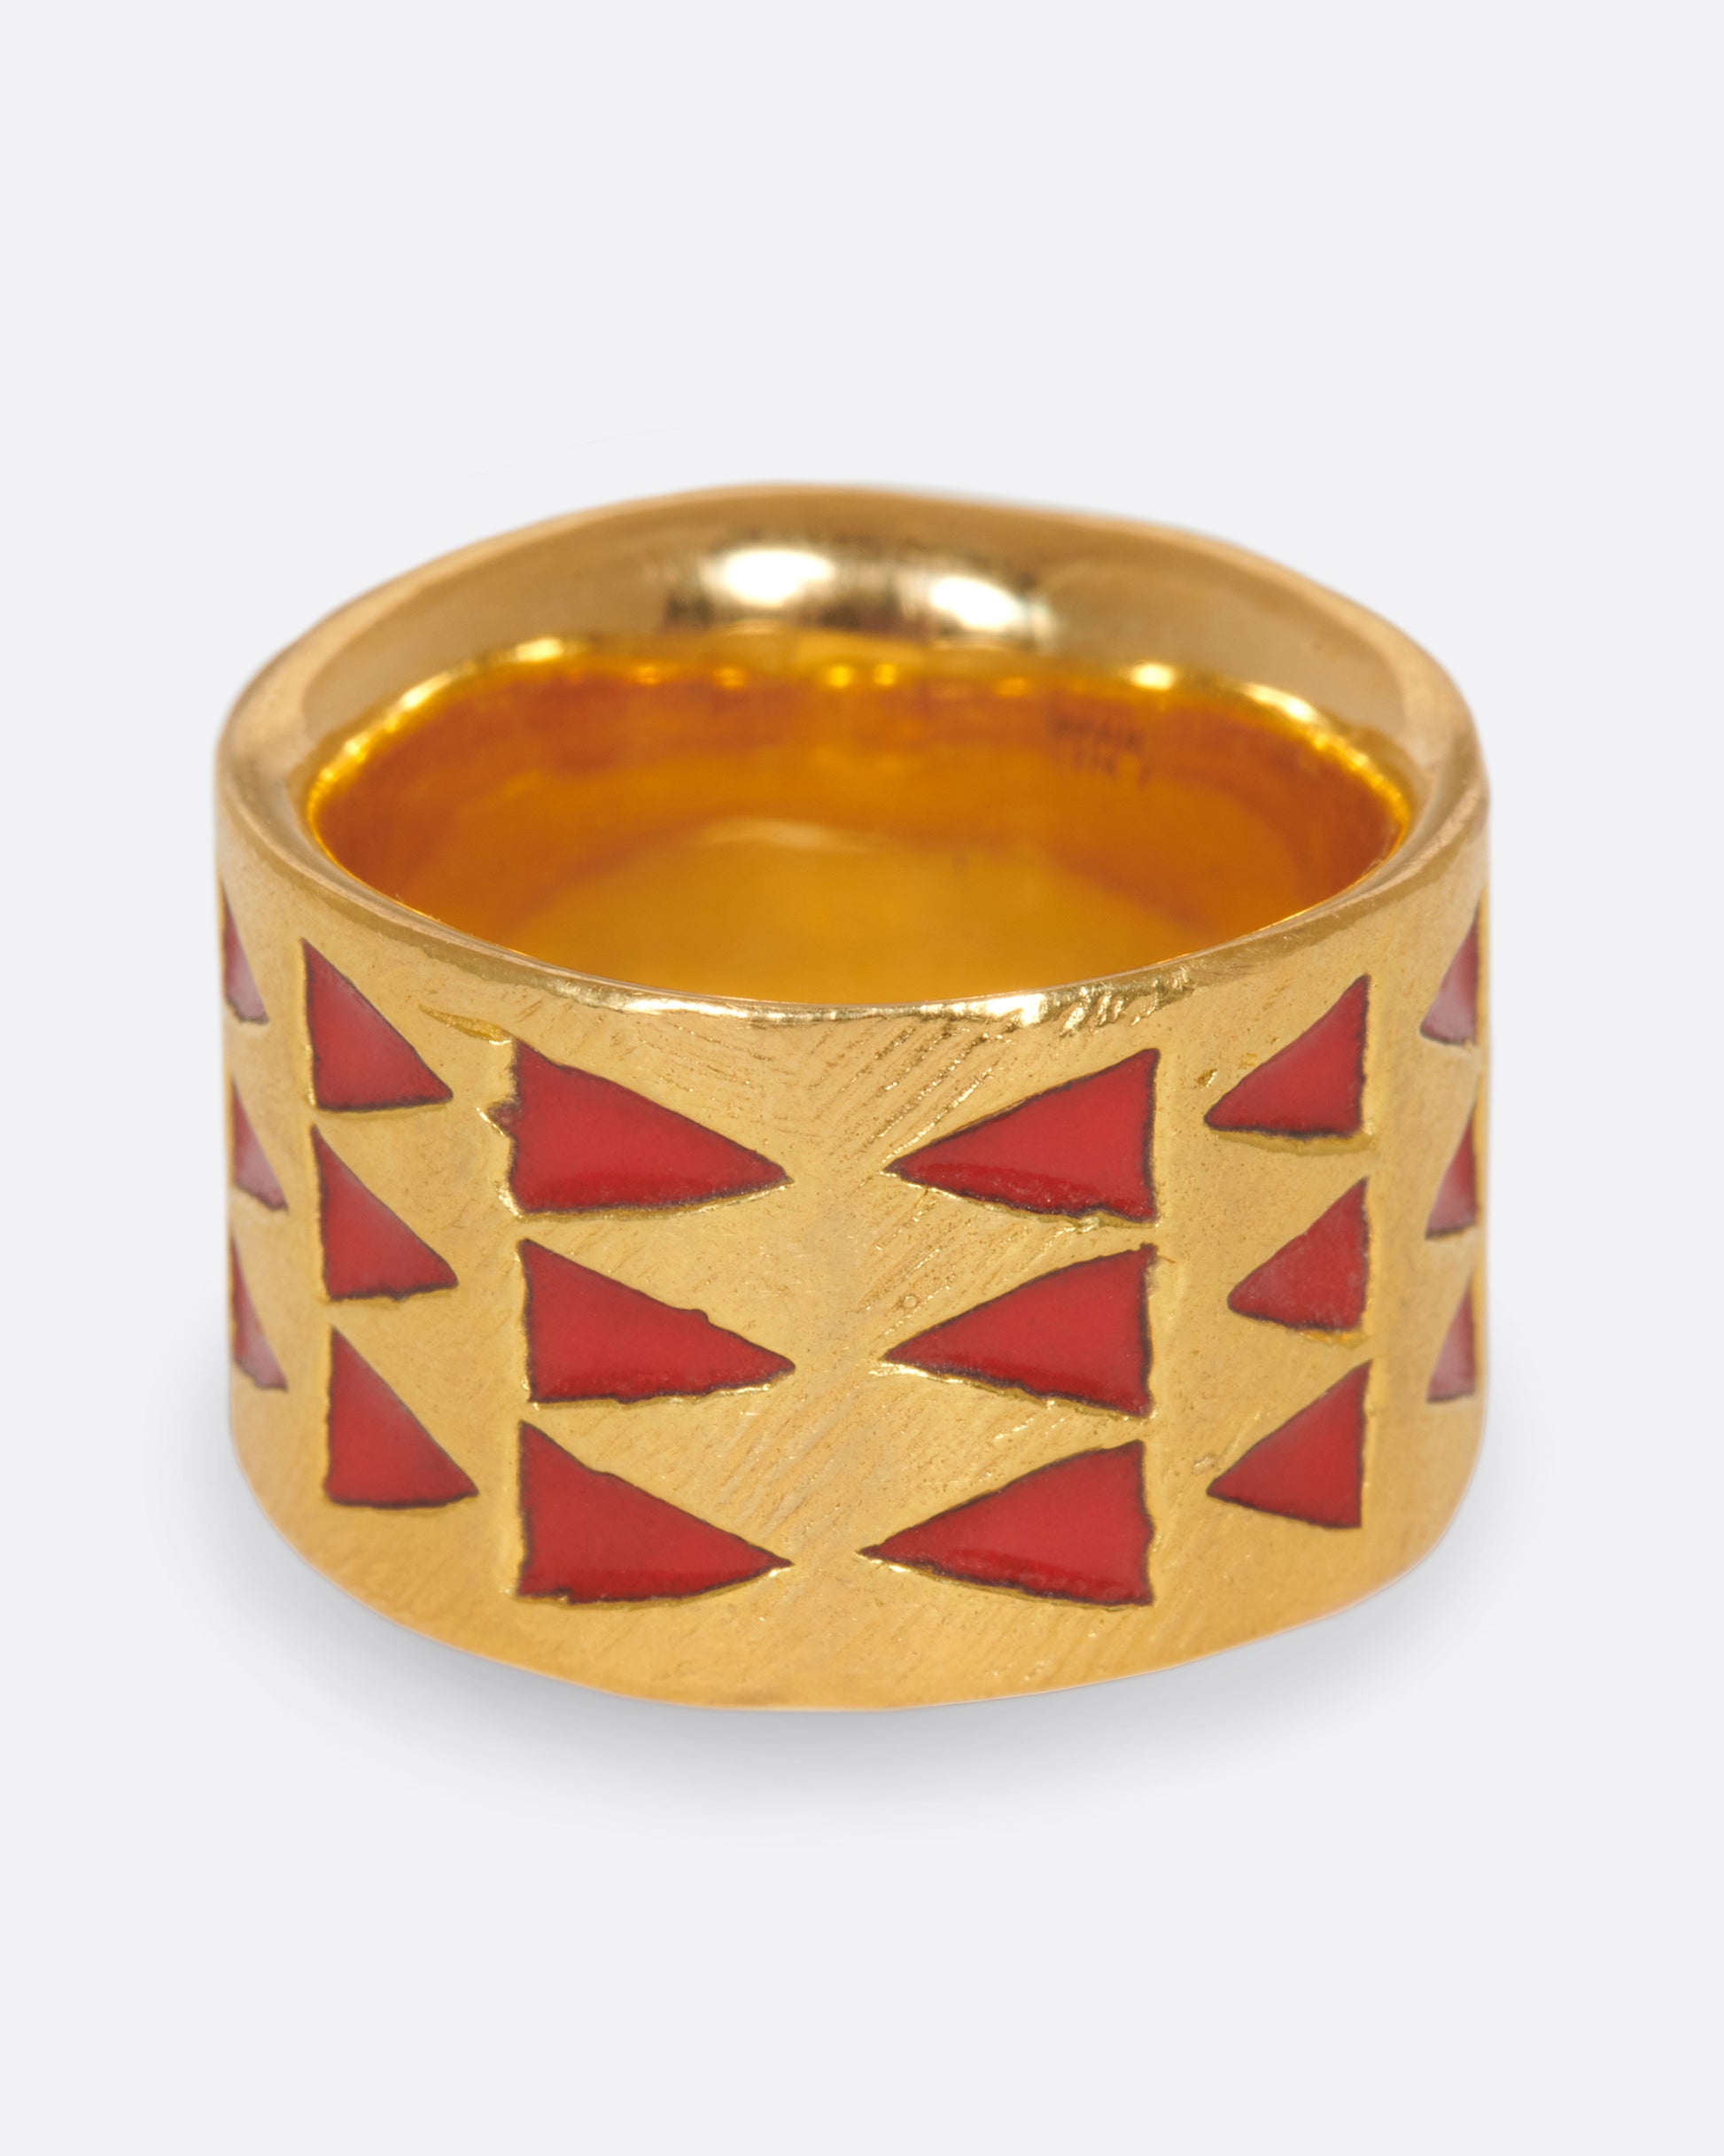 A handcrafted yellow gold band with red enamel triangles that meet at one center point.